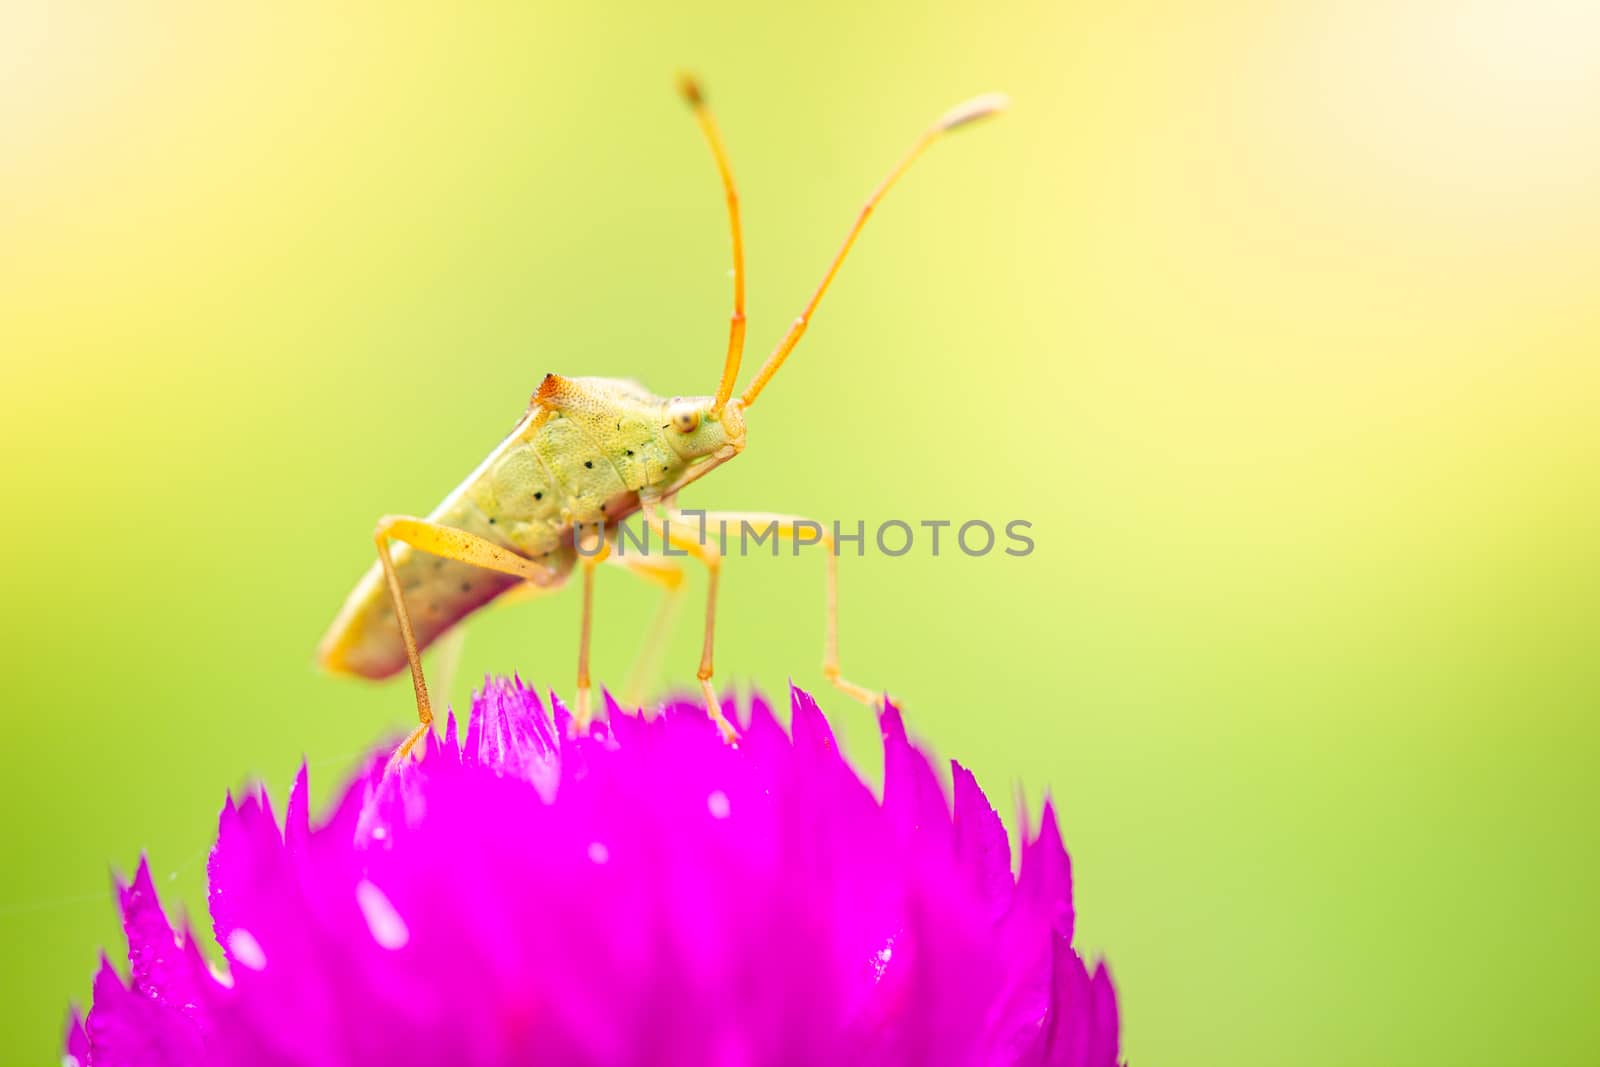 A small green insect on purple flowers blooming in a refreshing. by SaitanSainam